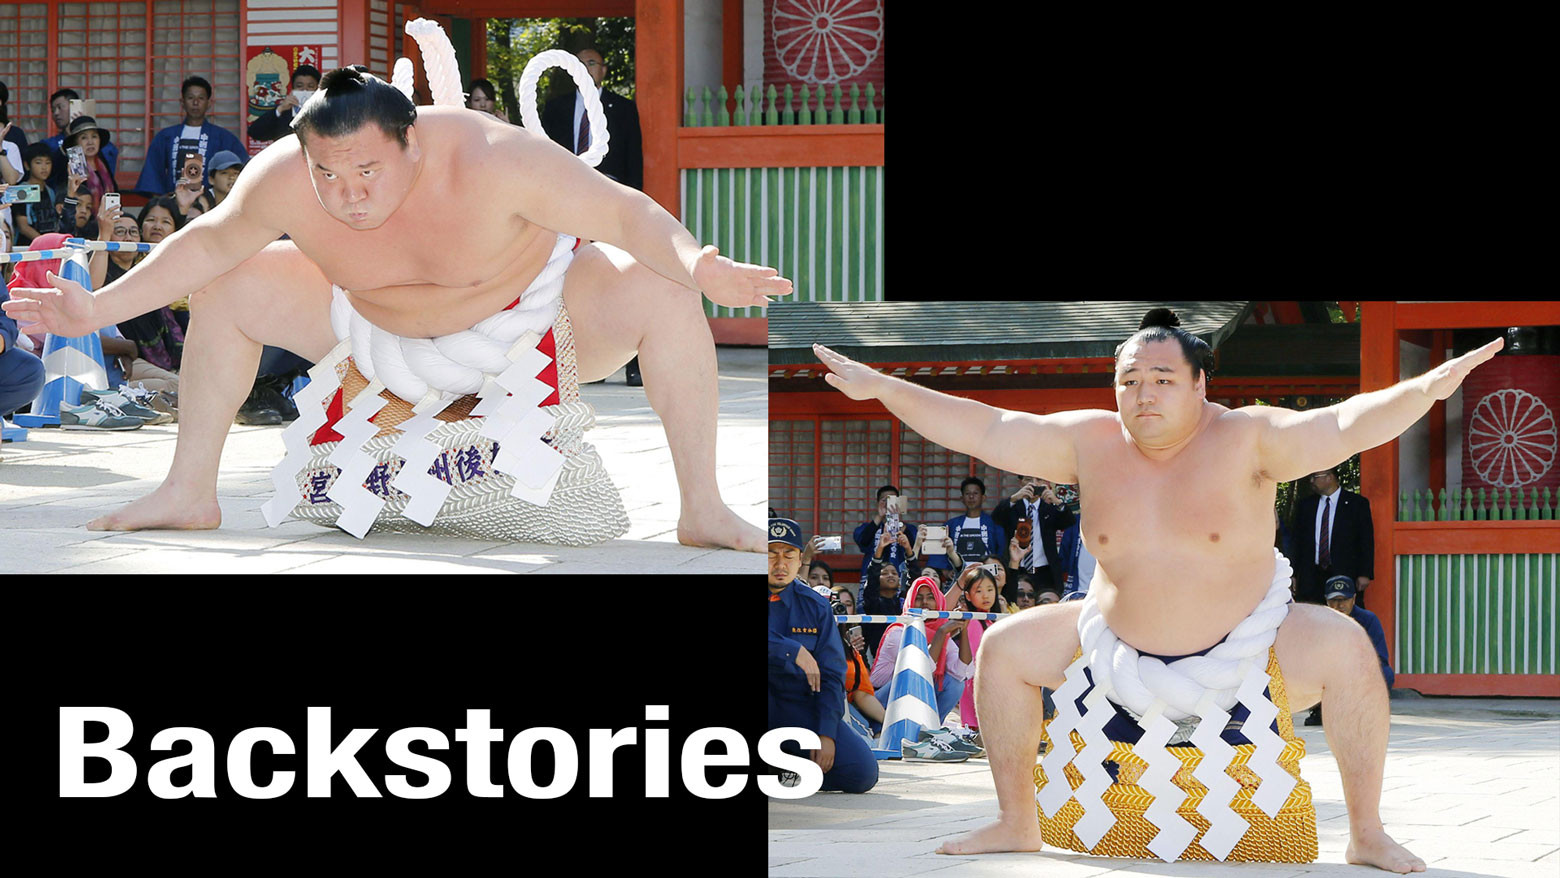 SUMO/ Takakeisho clinches his third championship in fight to finish